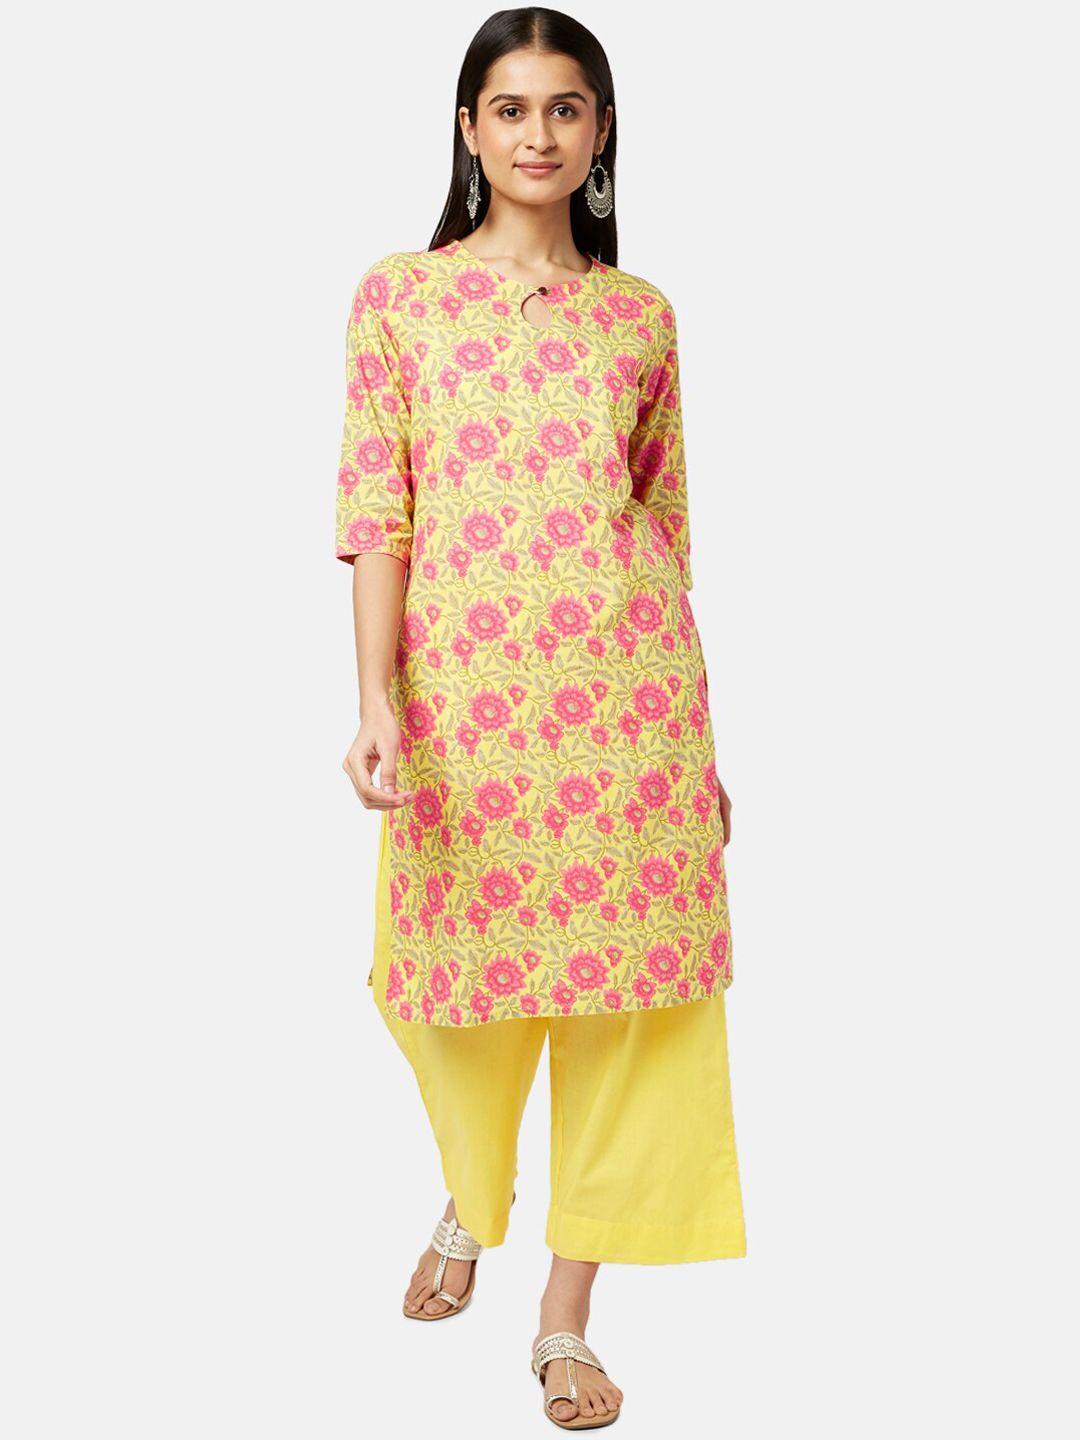 rangmanch by pantaloons women yellow floral printed pure cotton kurta with trousers